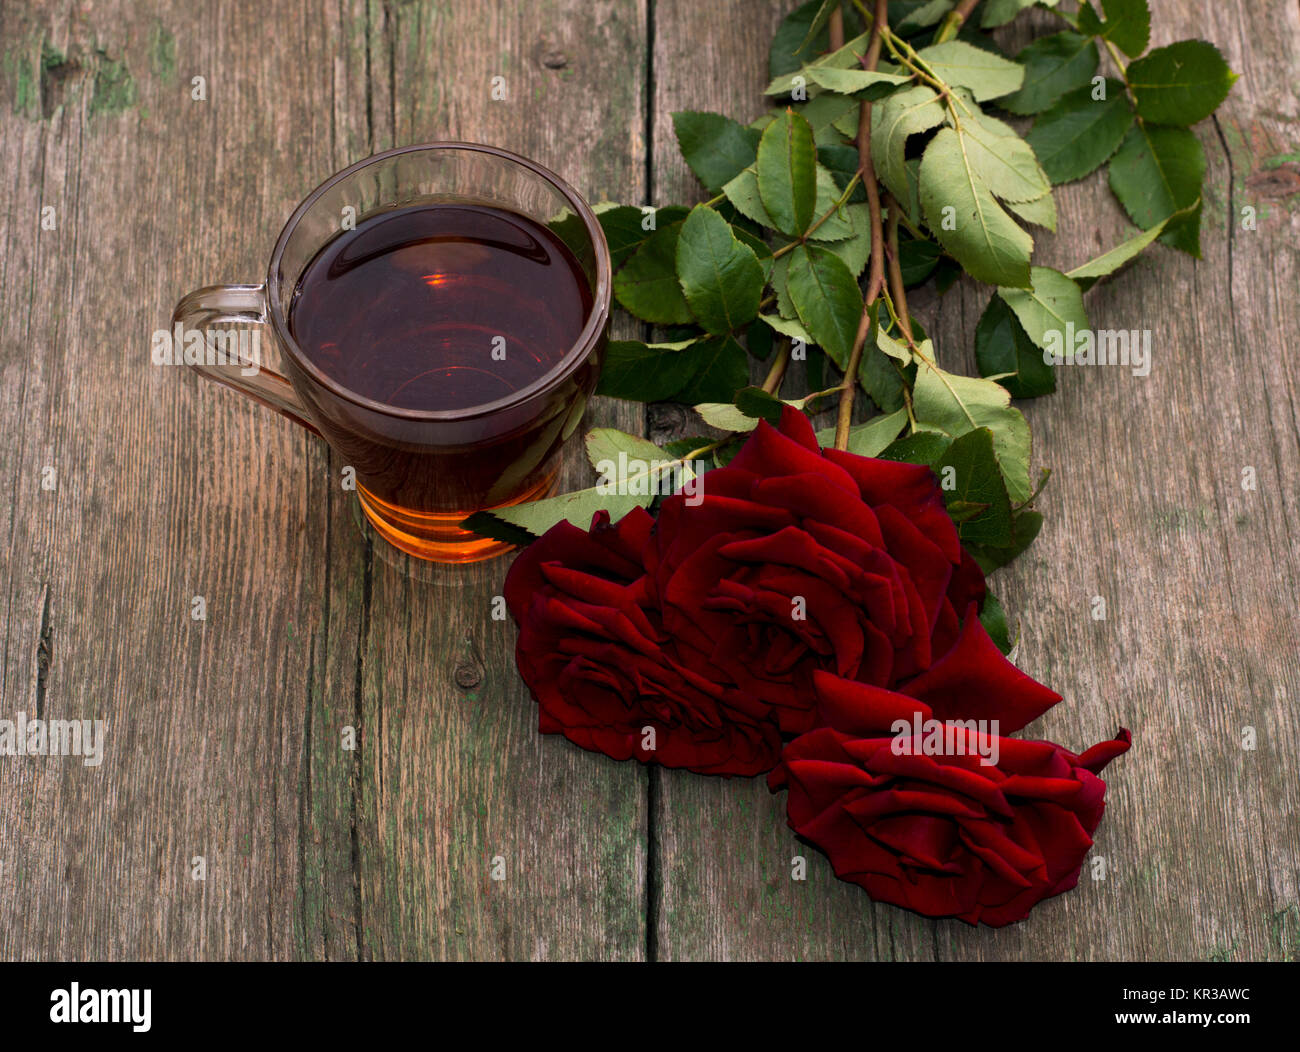 Cup Of Tea And Three Red Beautiful Roses Stock Photo Alamy